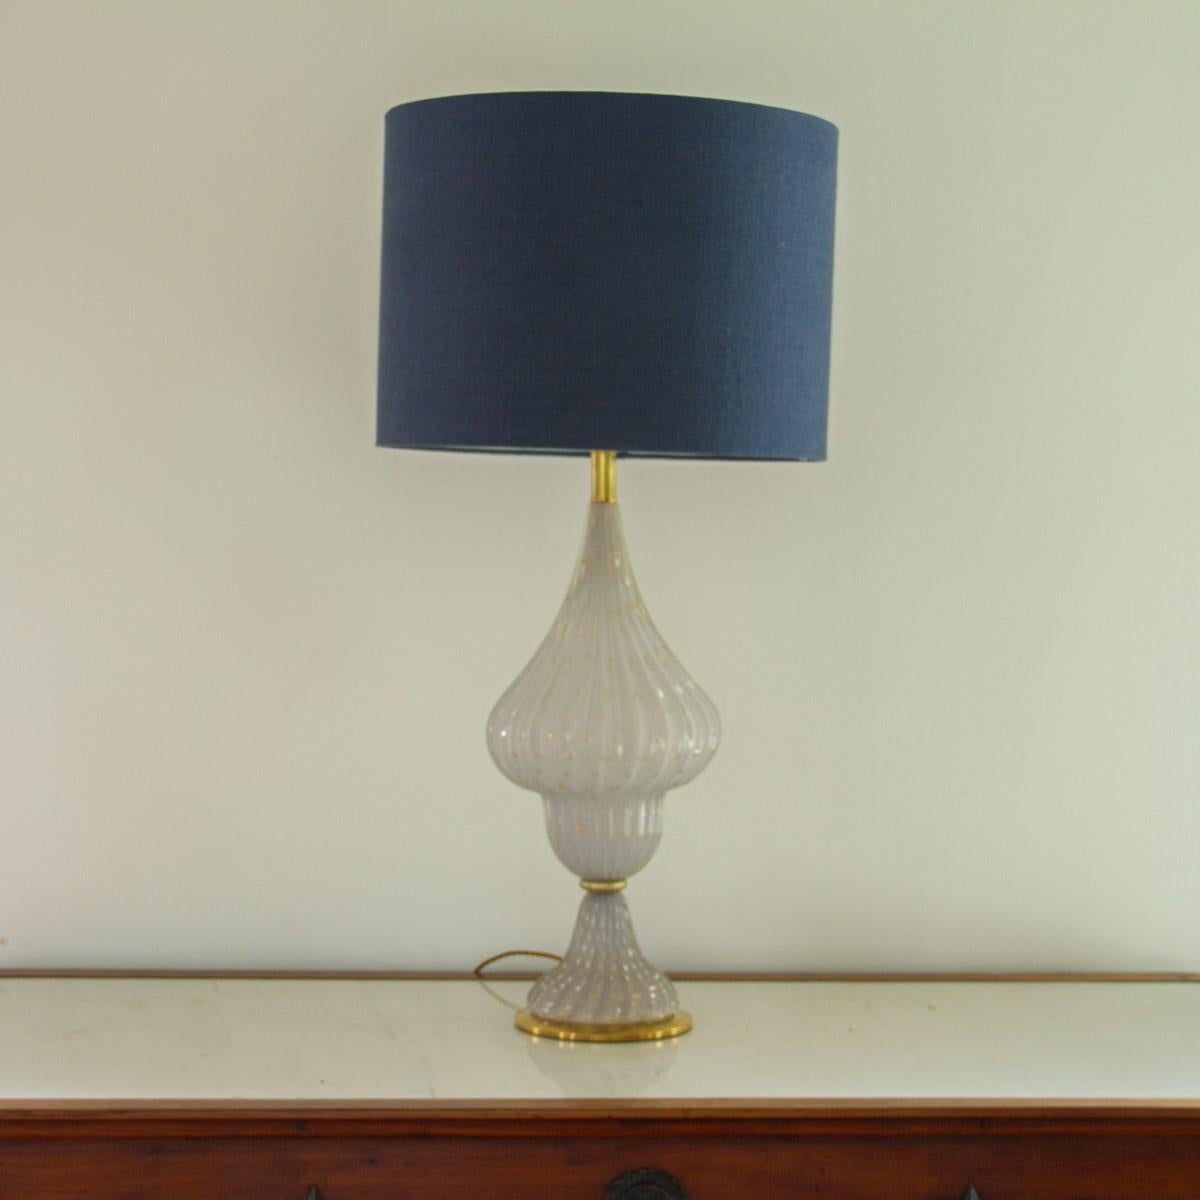 A single psykter shaped lamp made from Murano white glass which has been ribbed and blown with gold bubble details throughout. The lamp is set on a brass base and has brass details accentuating the shape,1960s. We also have a pair of matching